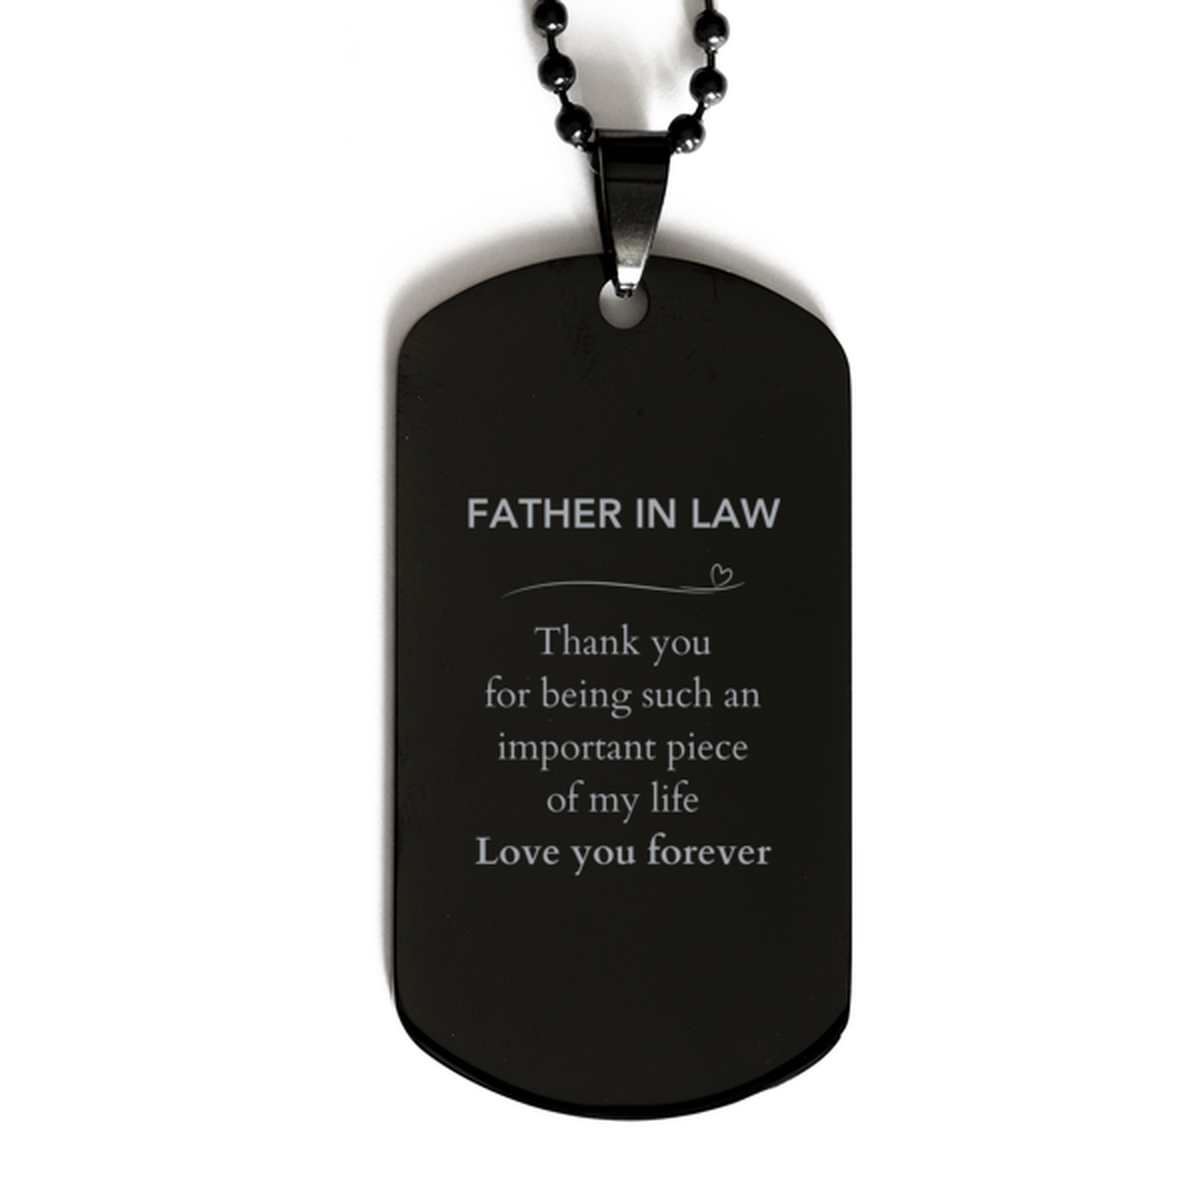 Appropriate Father In Law Black Dog Tag Epic Birthday Gifts for Father In Law Thank you for being such an important piece of my life Father In Law Christmas Mothers Fathers Day